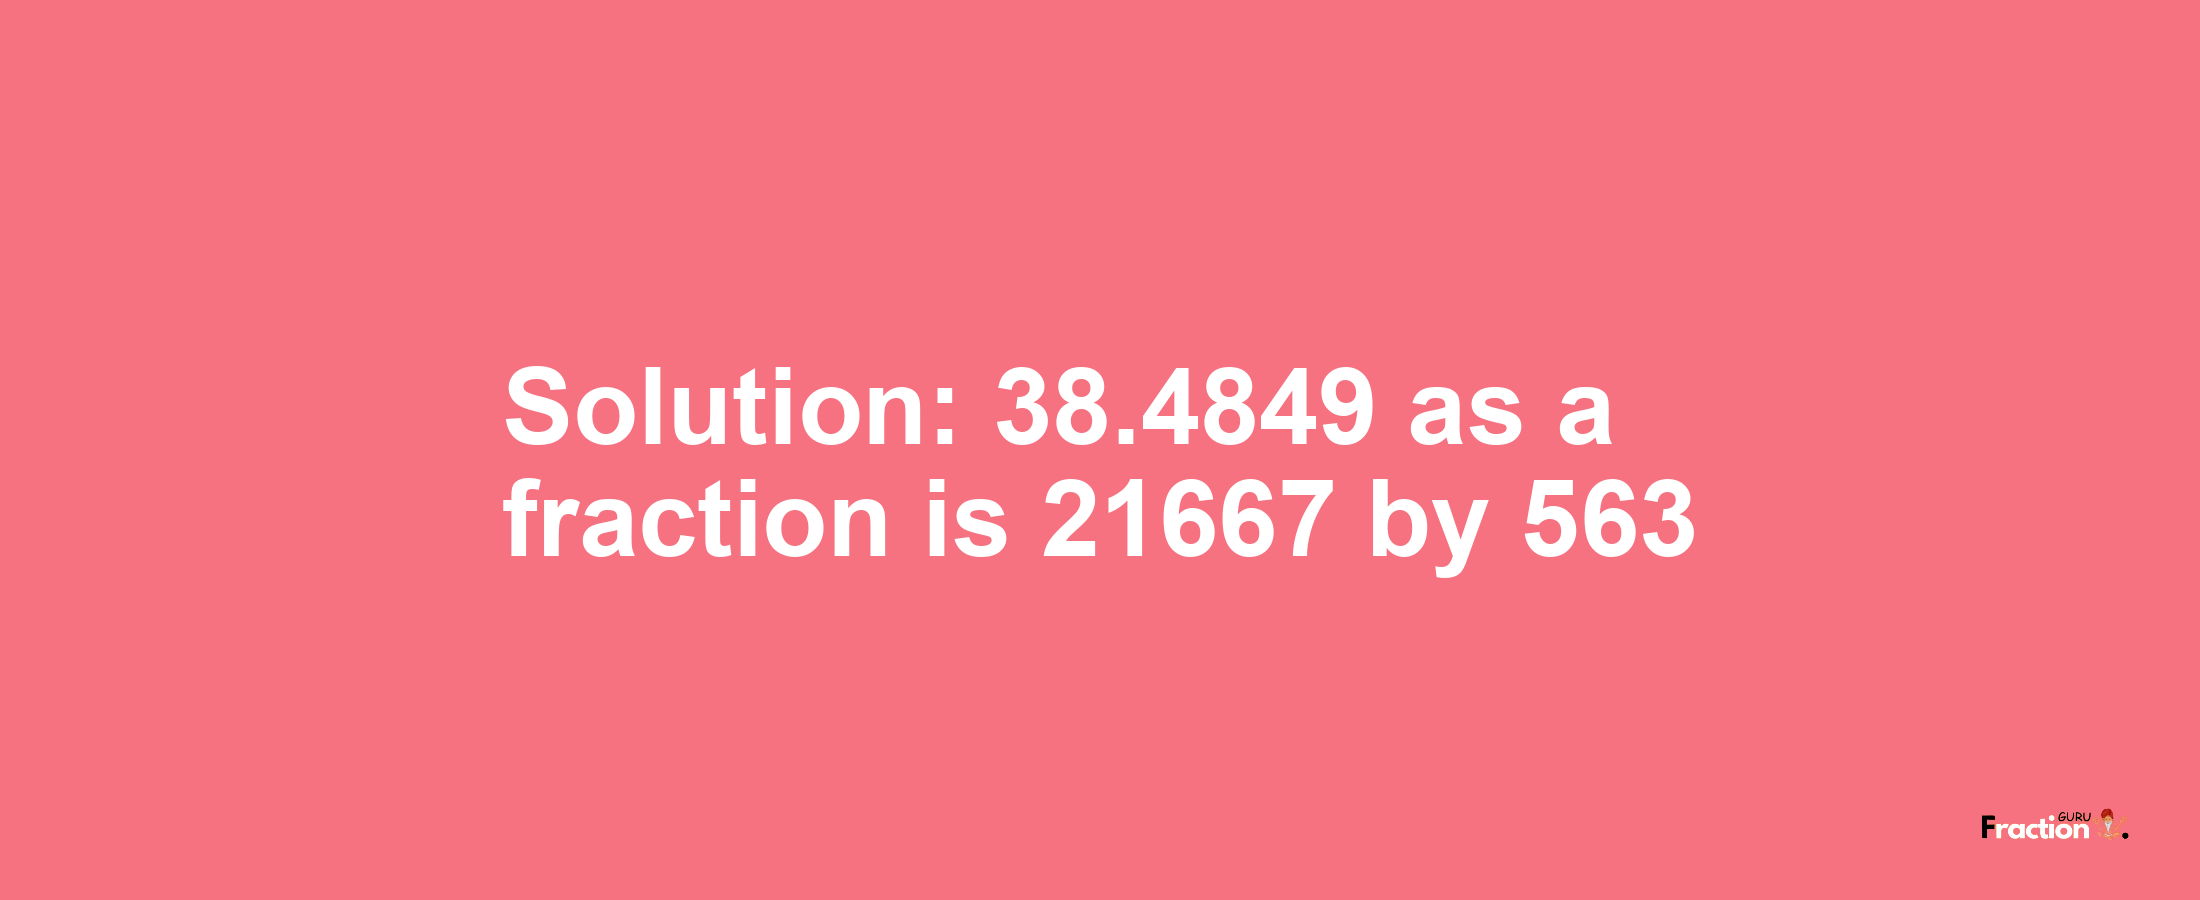 Solution:38.4849 as a fraction is 21667/563